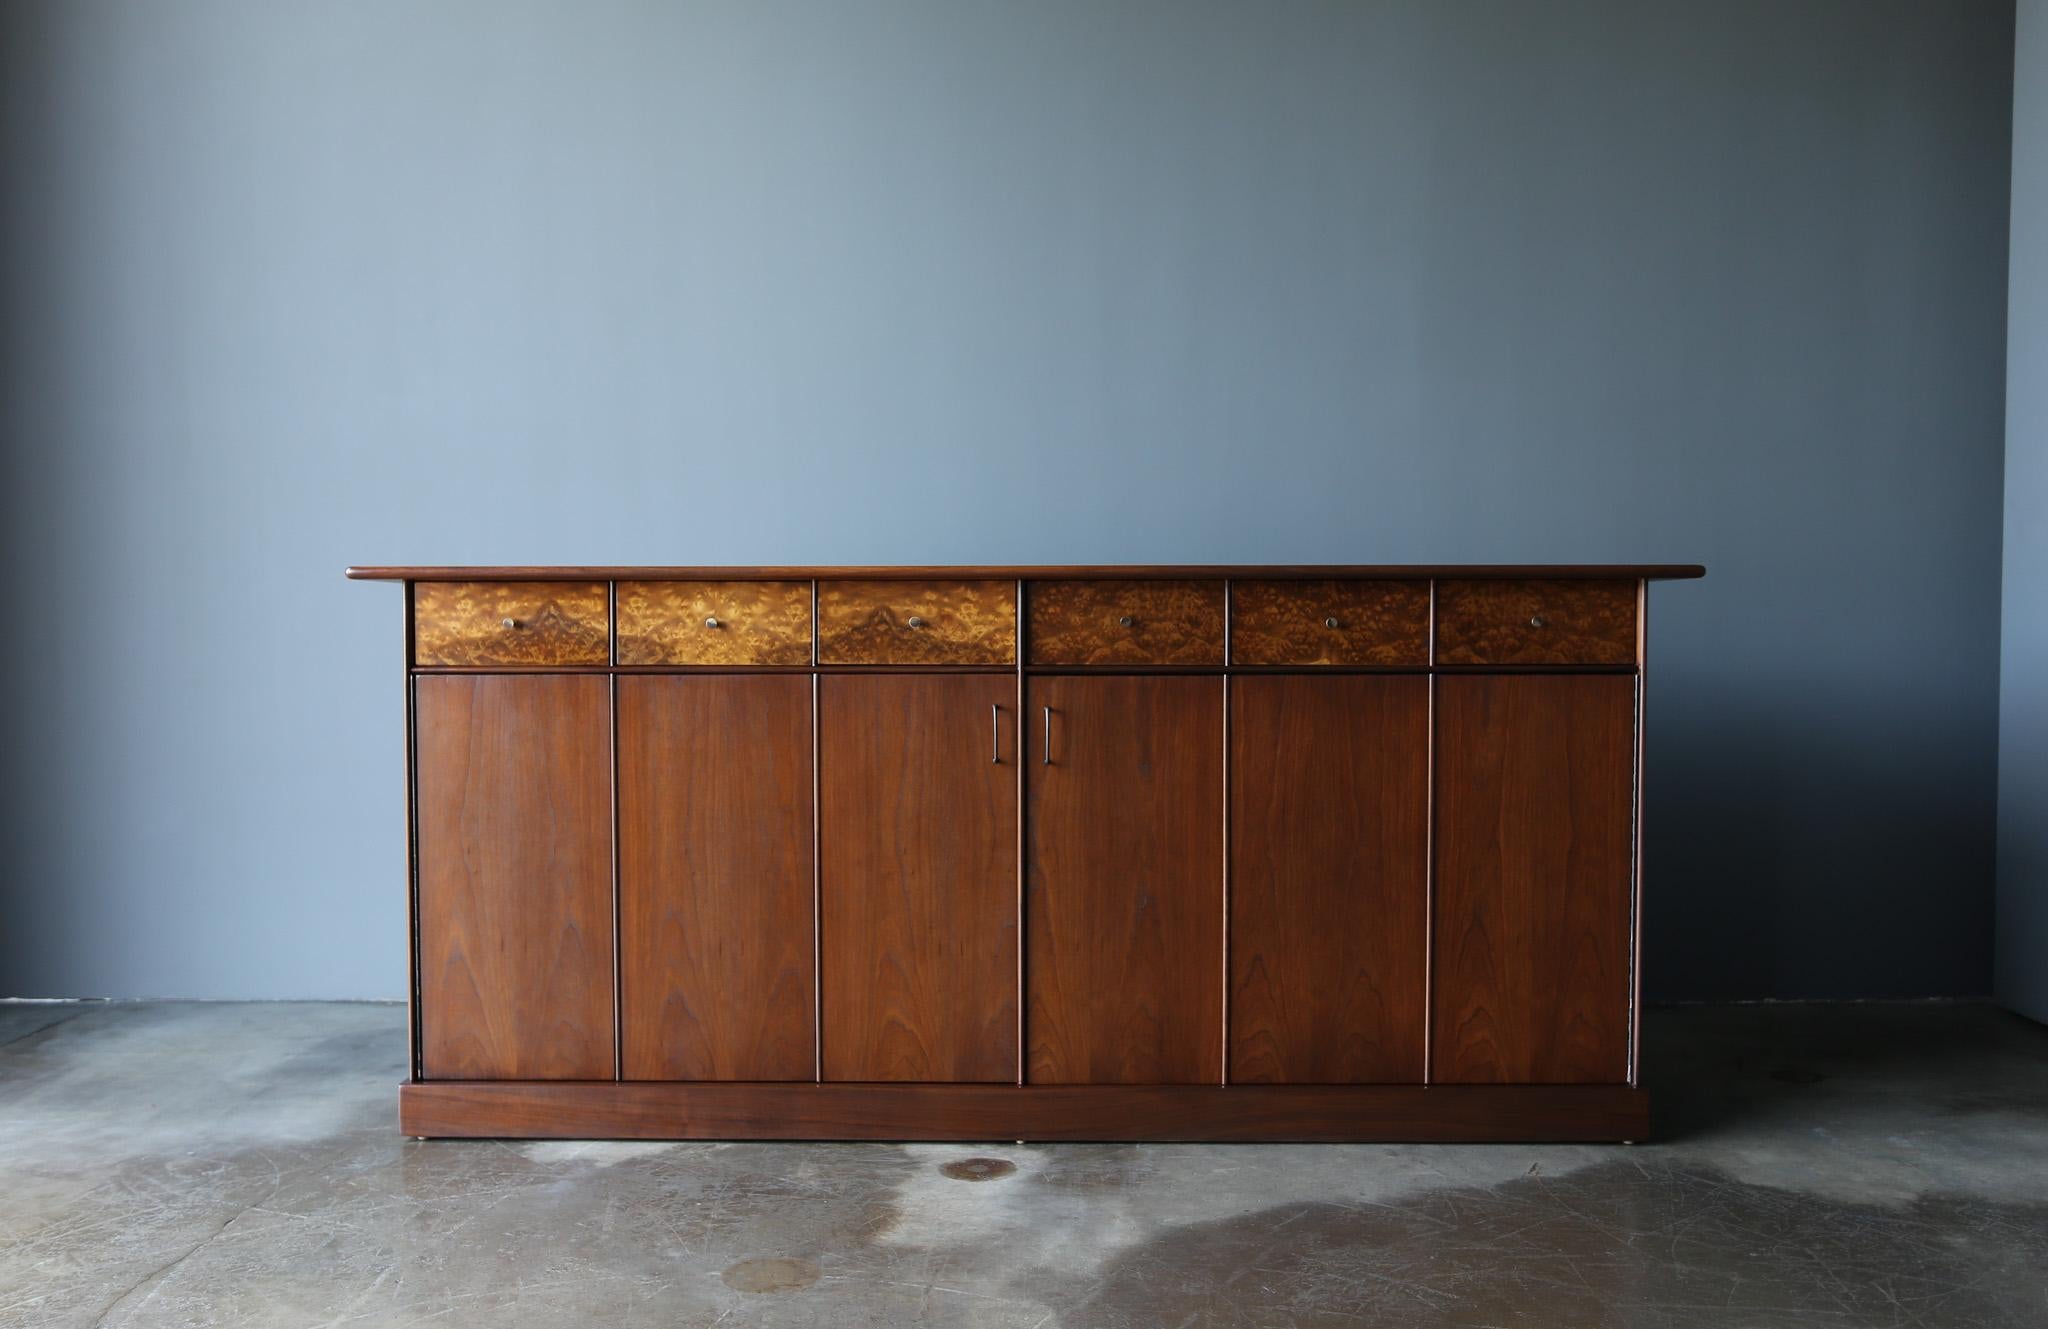 American Milo Baughman Cabinet / Dresser for Directional, United States, c.1965